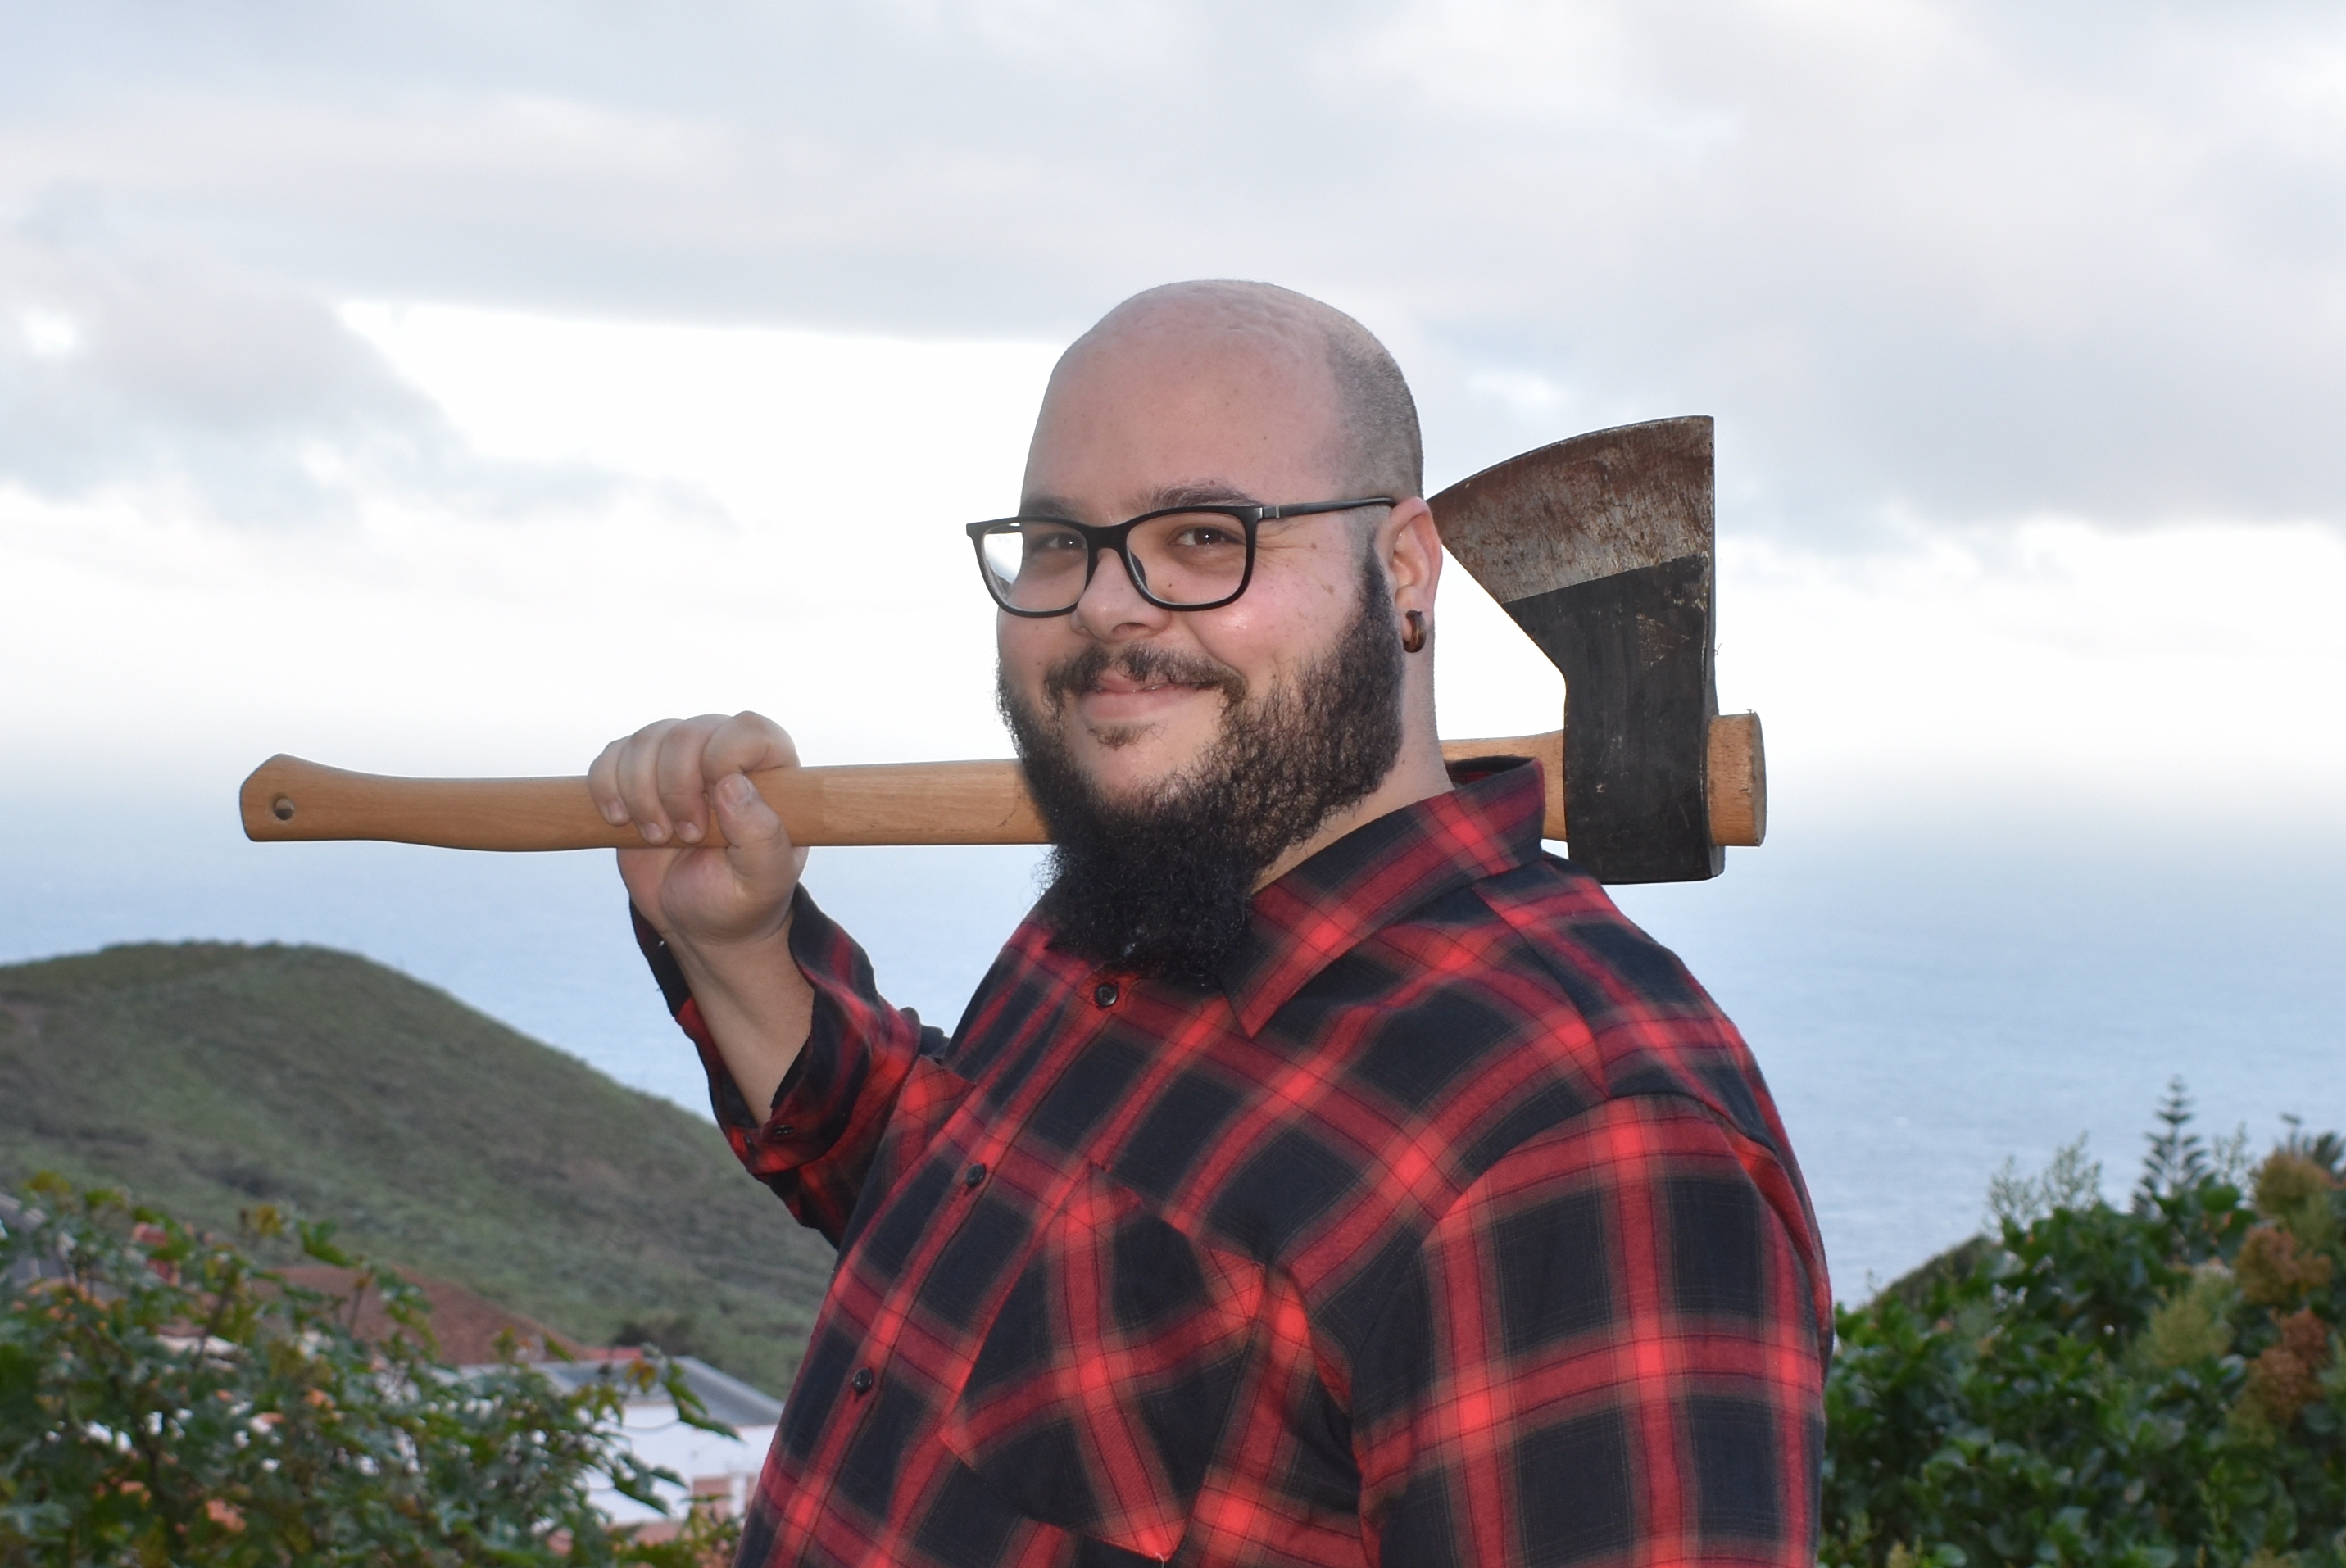 Me dressed as a Lumberjack with an ax on my shoulder